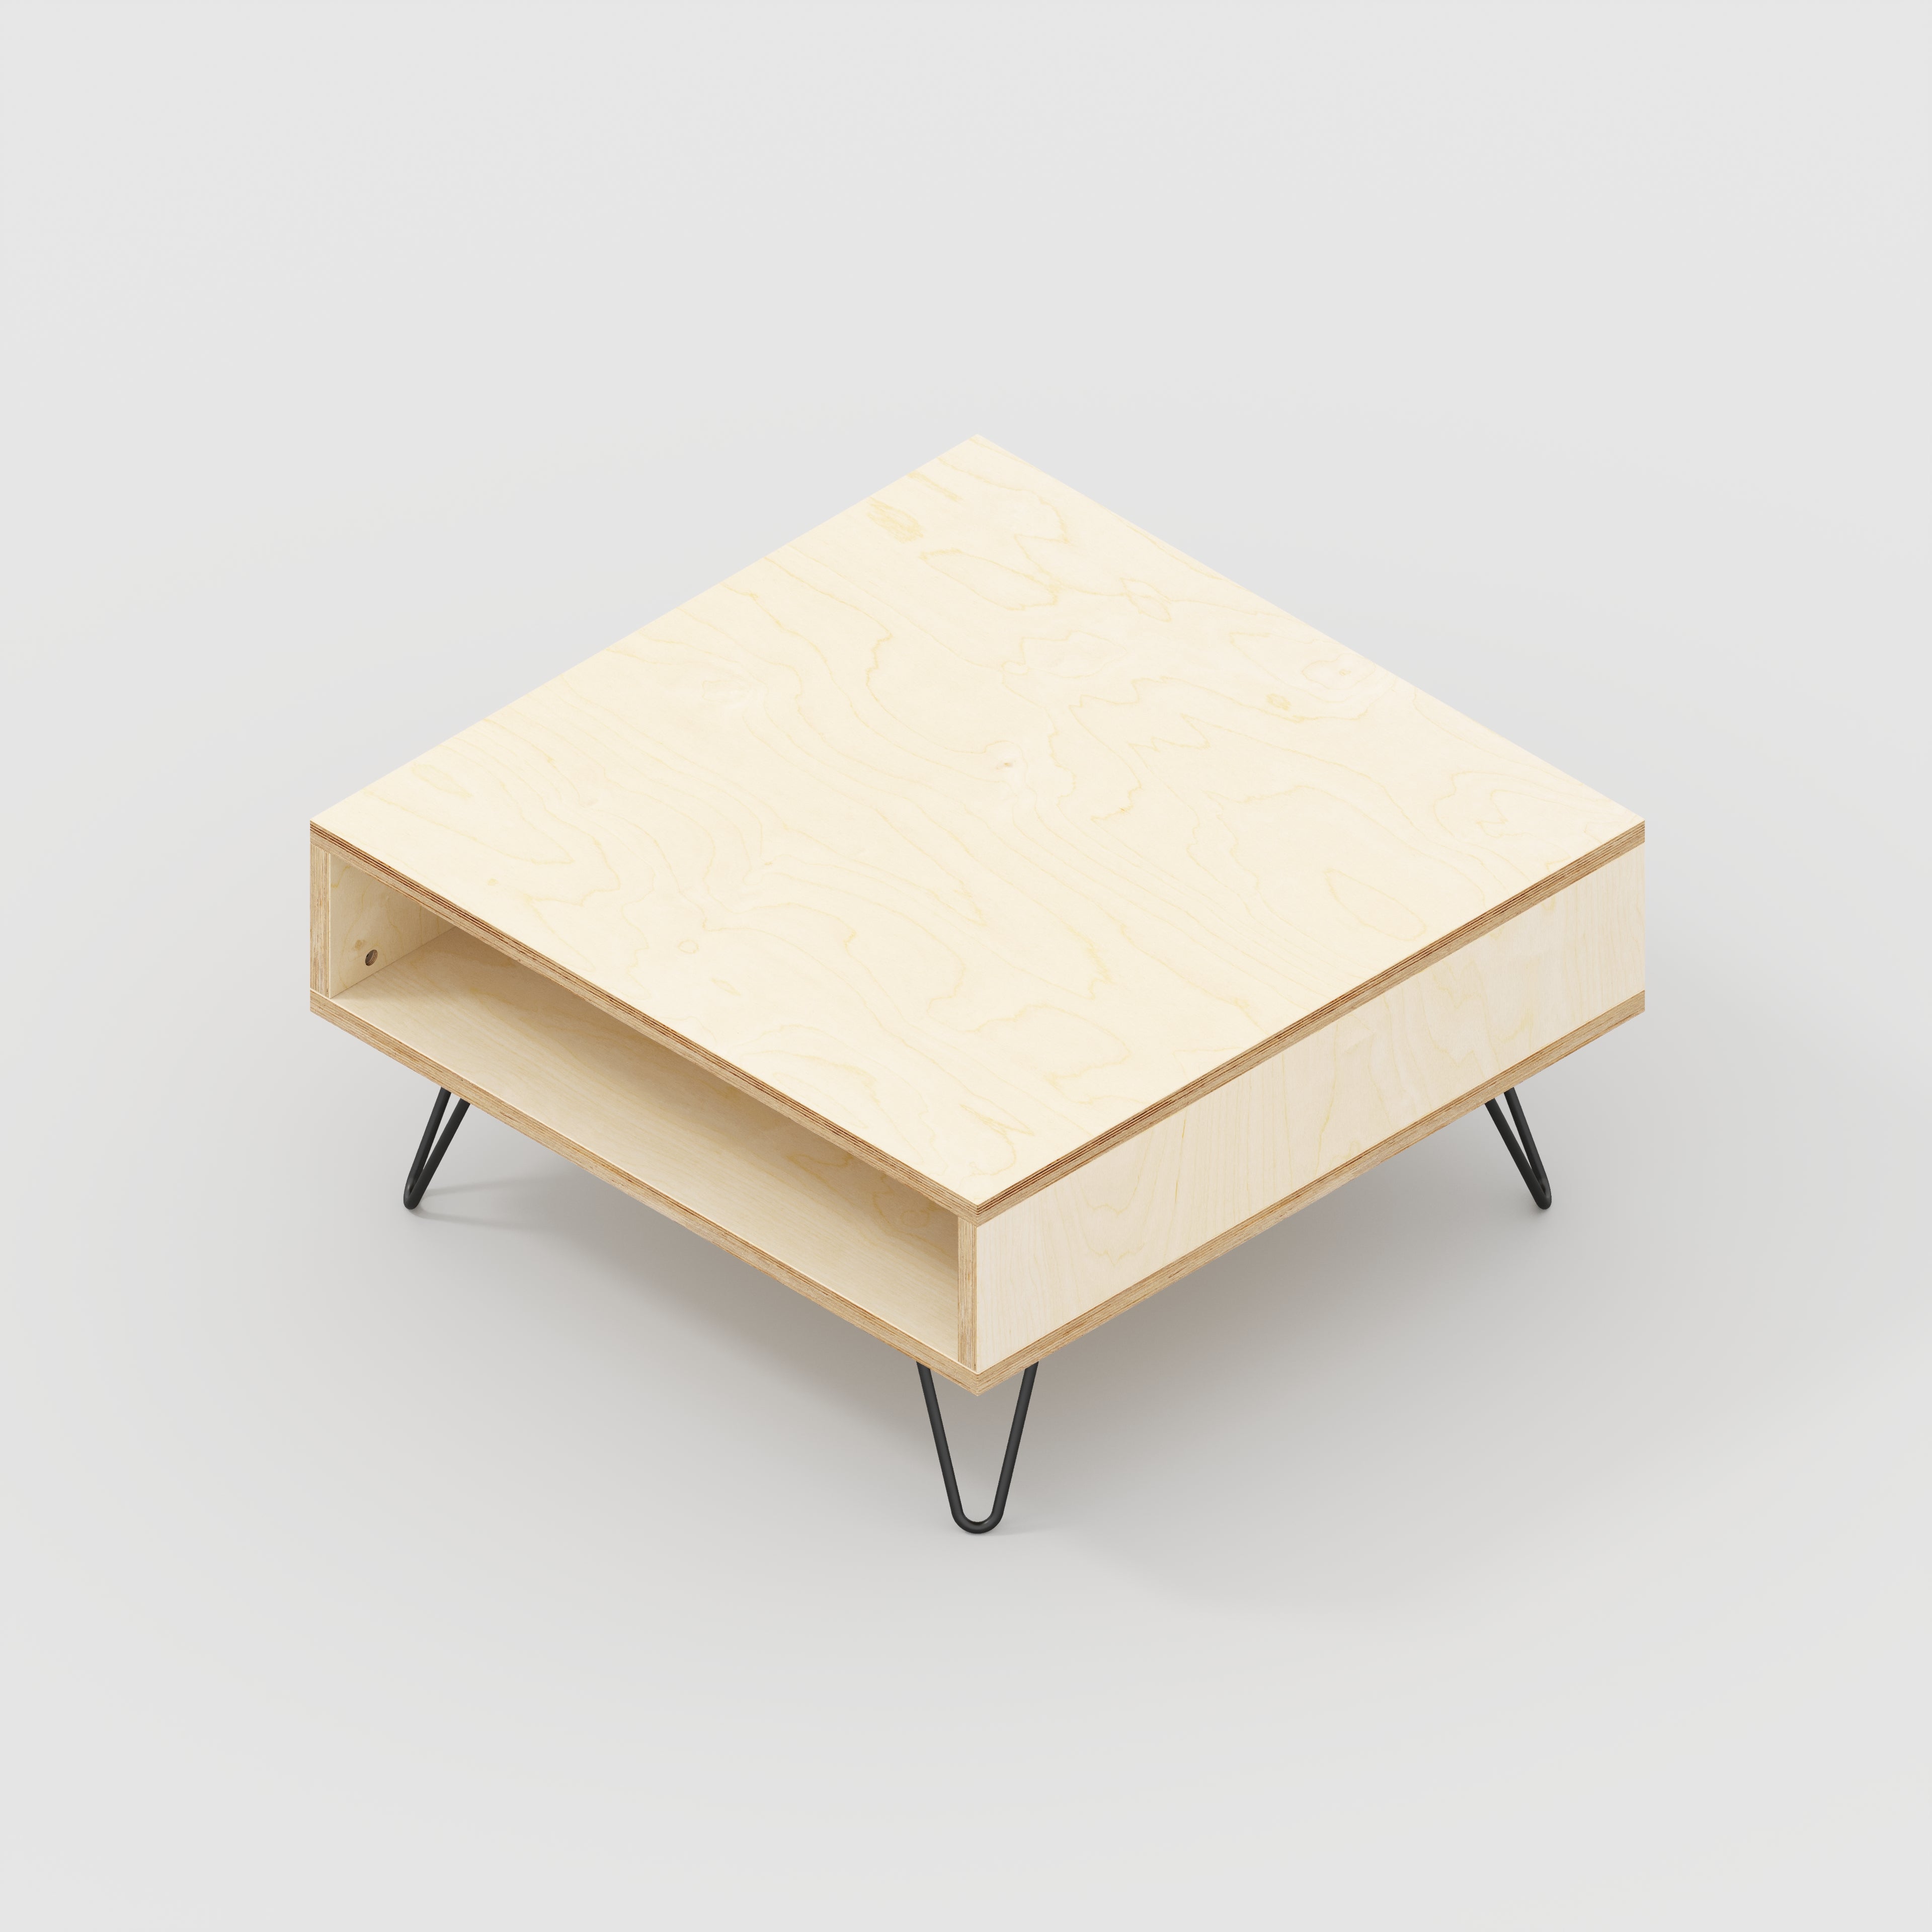 Coffee Table with Box Storage and Black Hairpin Legs - Plywood Birch - 800(w) x 800(d) x 400(h)